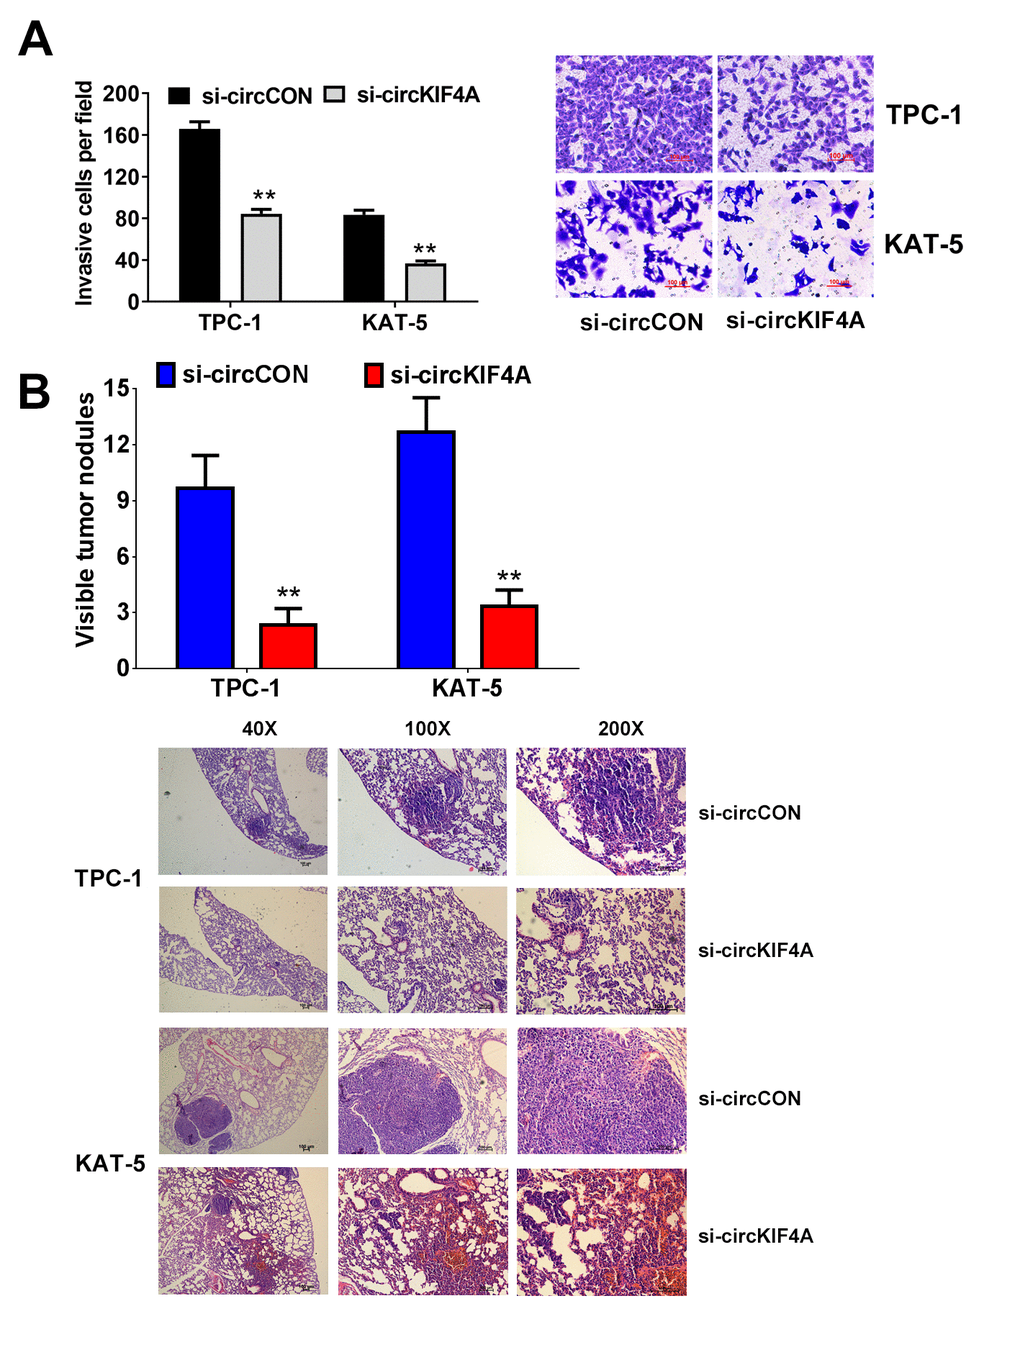 Downregulation of circKIF4A suppresses the metastasis of papillary thyroid cancer cells. (A) Transwell experiments were conducted in TPC-1 and KAT-5 cell line. (B) The number of lung metastases was counted and recorded. HE-stained sections of lung metastases were presented.